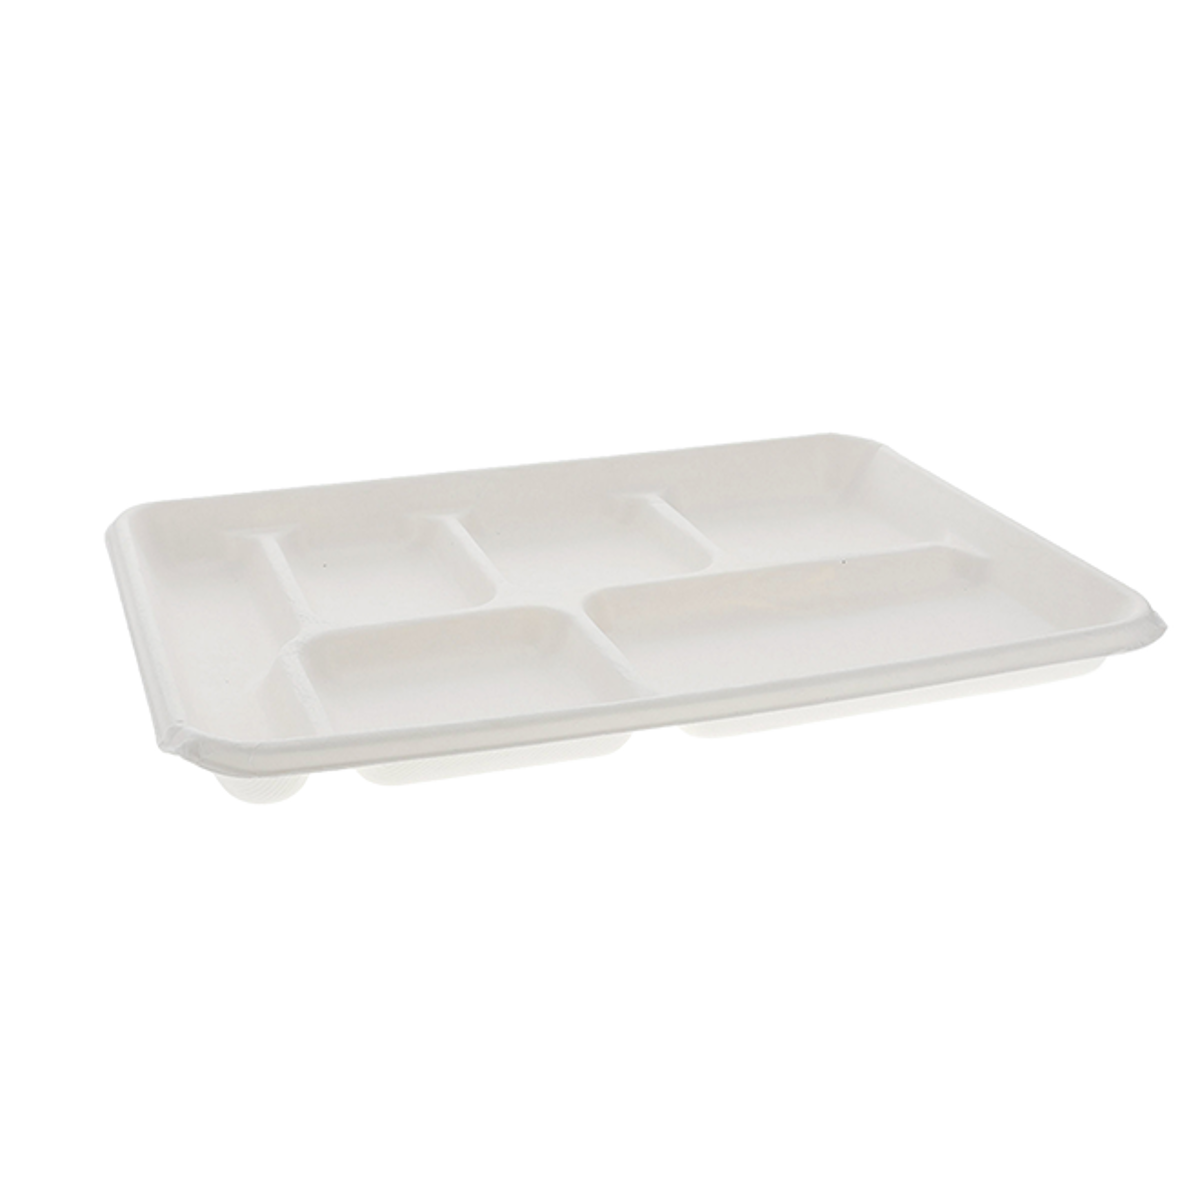 12.75” x 8.5” x 1.25” Compostable Molded Fiber 6 Compartment Tray, Natural,  250 ct.